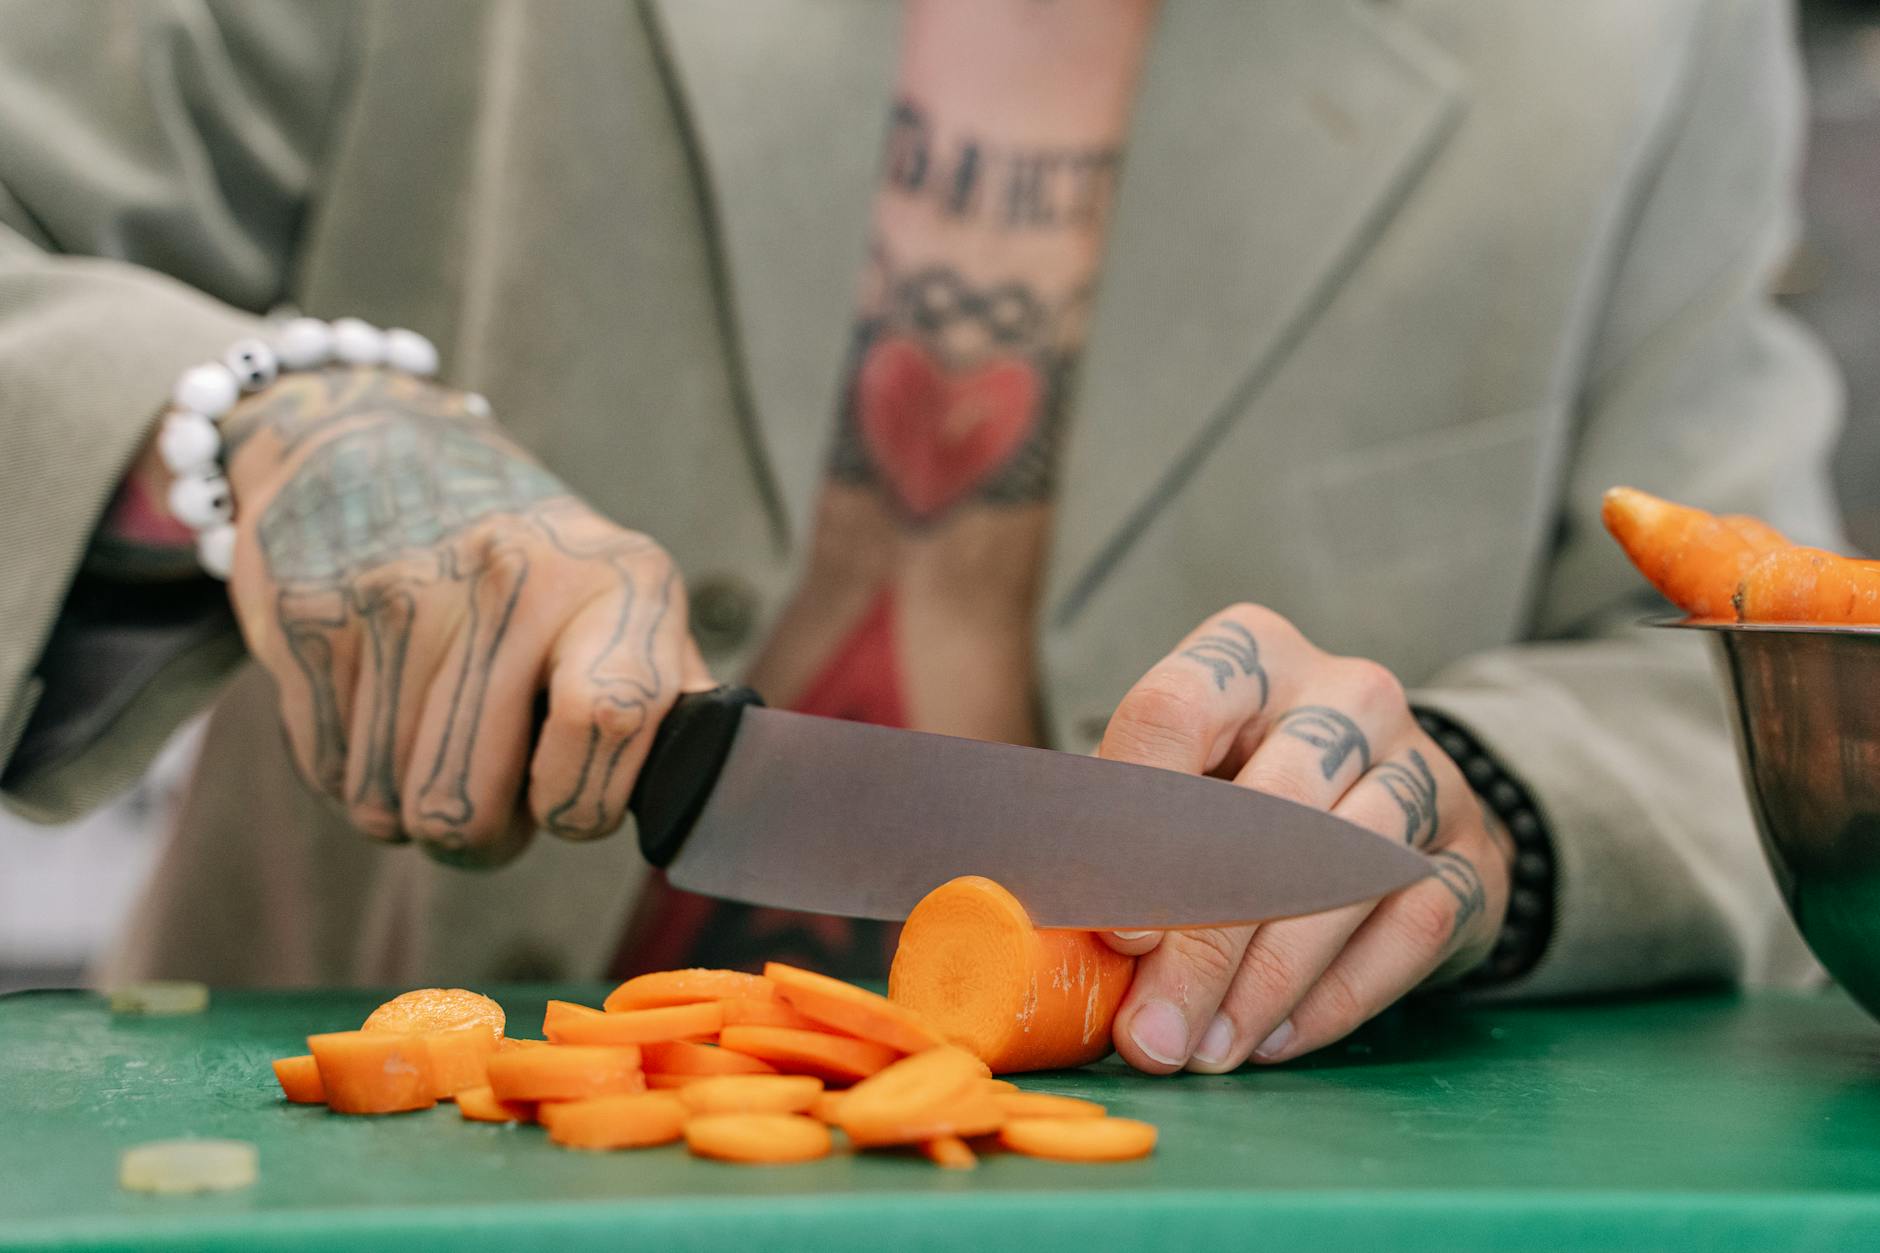 a person cutting carrots